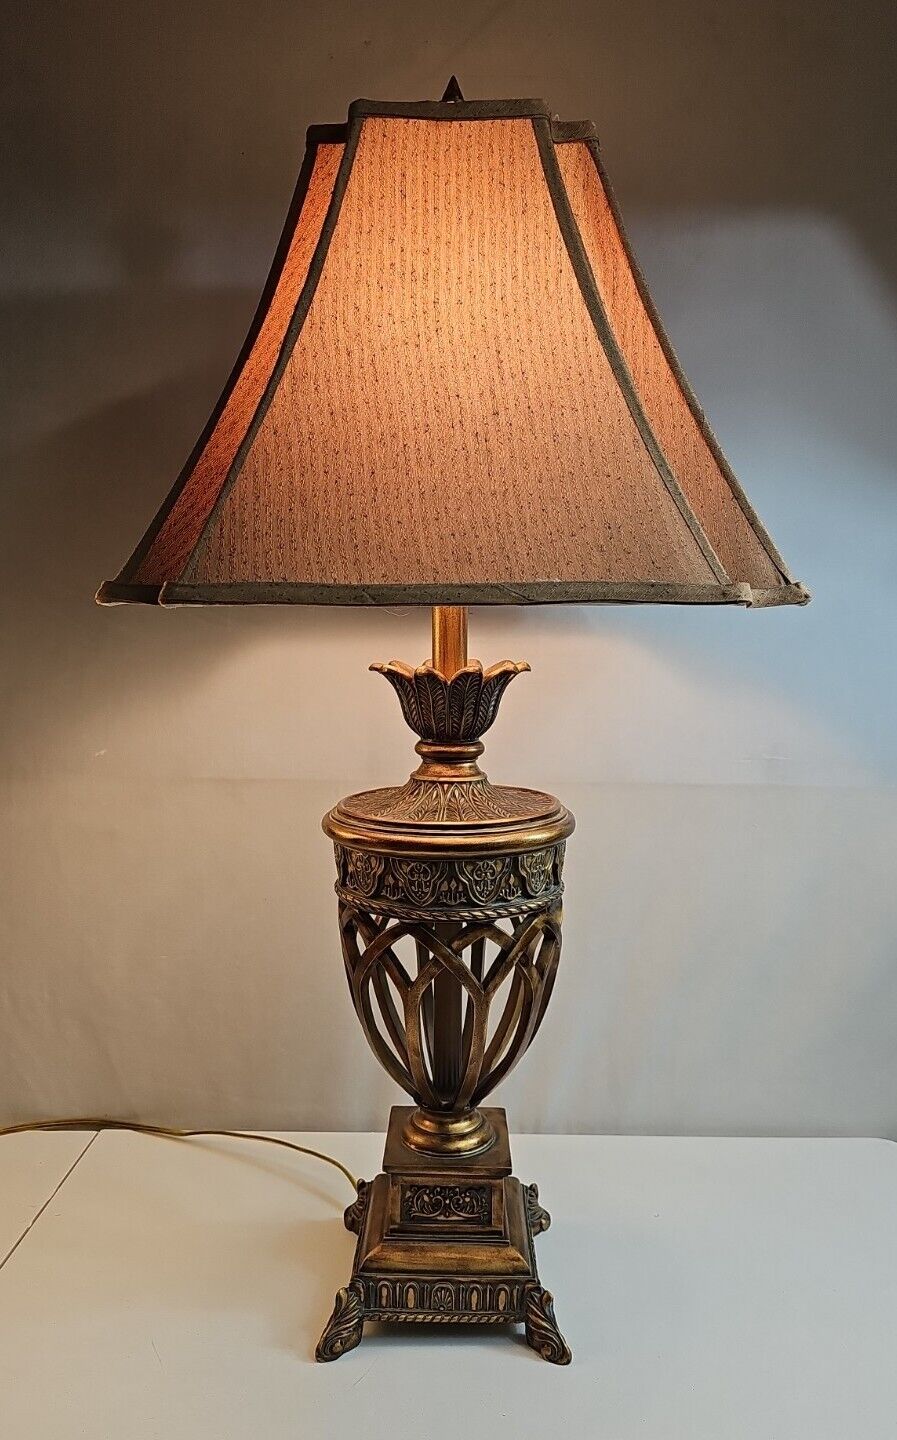 FREDERICK COOPER Chicago Vintage Gold And Bronze Laquer Wood Urn Lamp